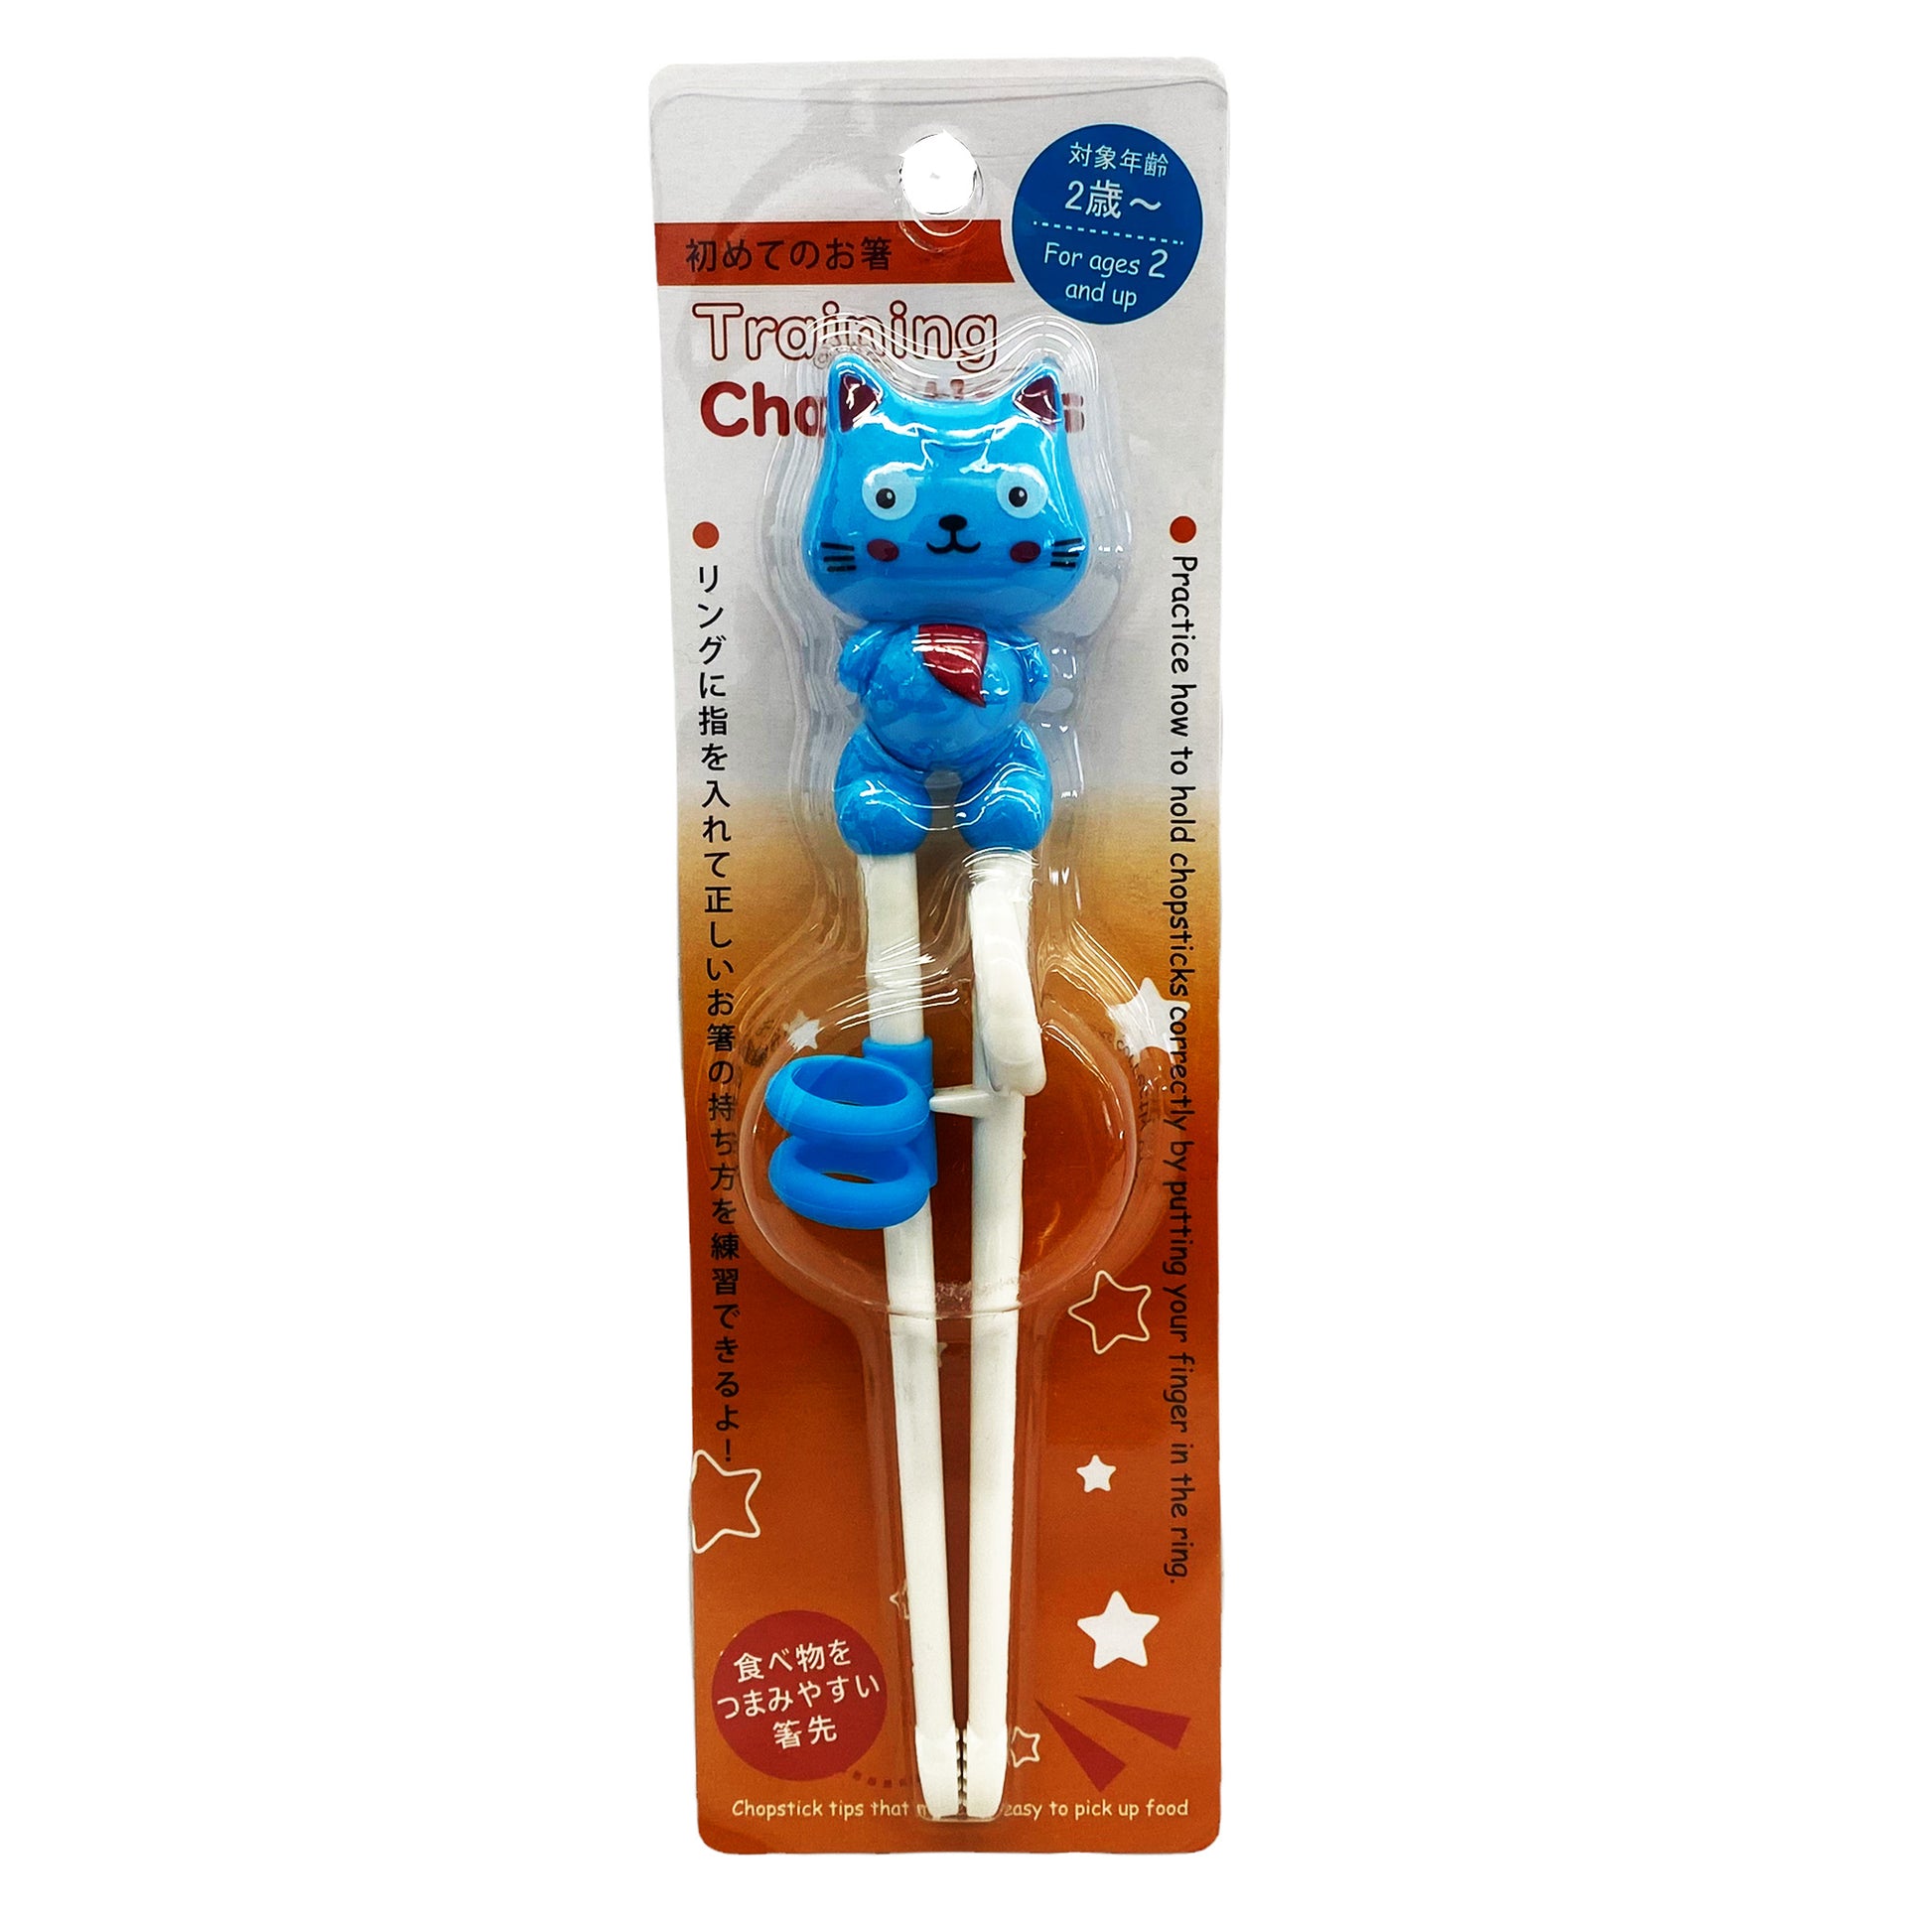 Front graphic view of Cat Training Chopsticks - Blue & White 7 Inches